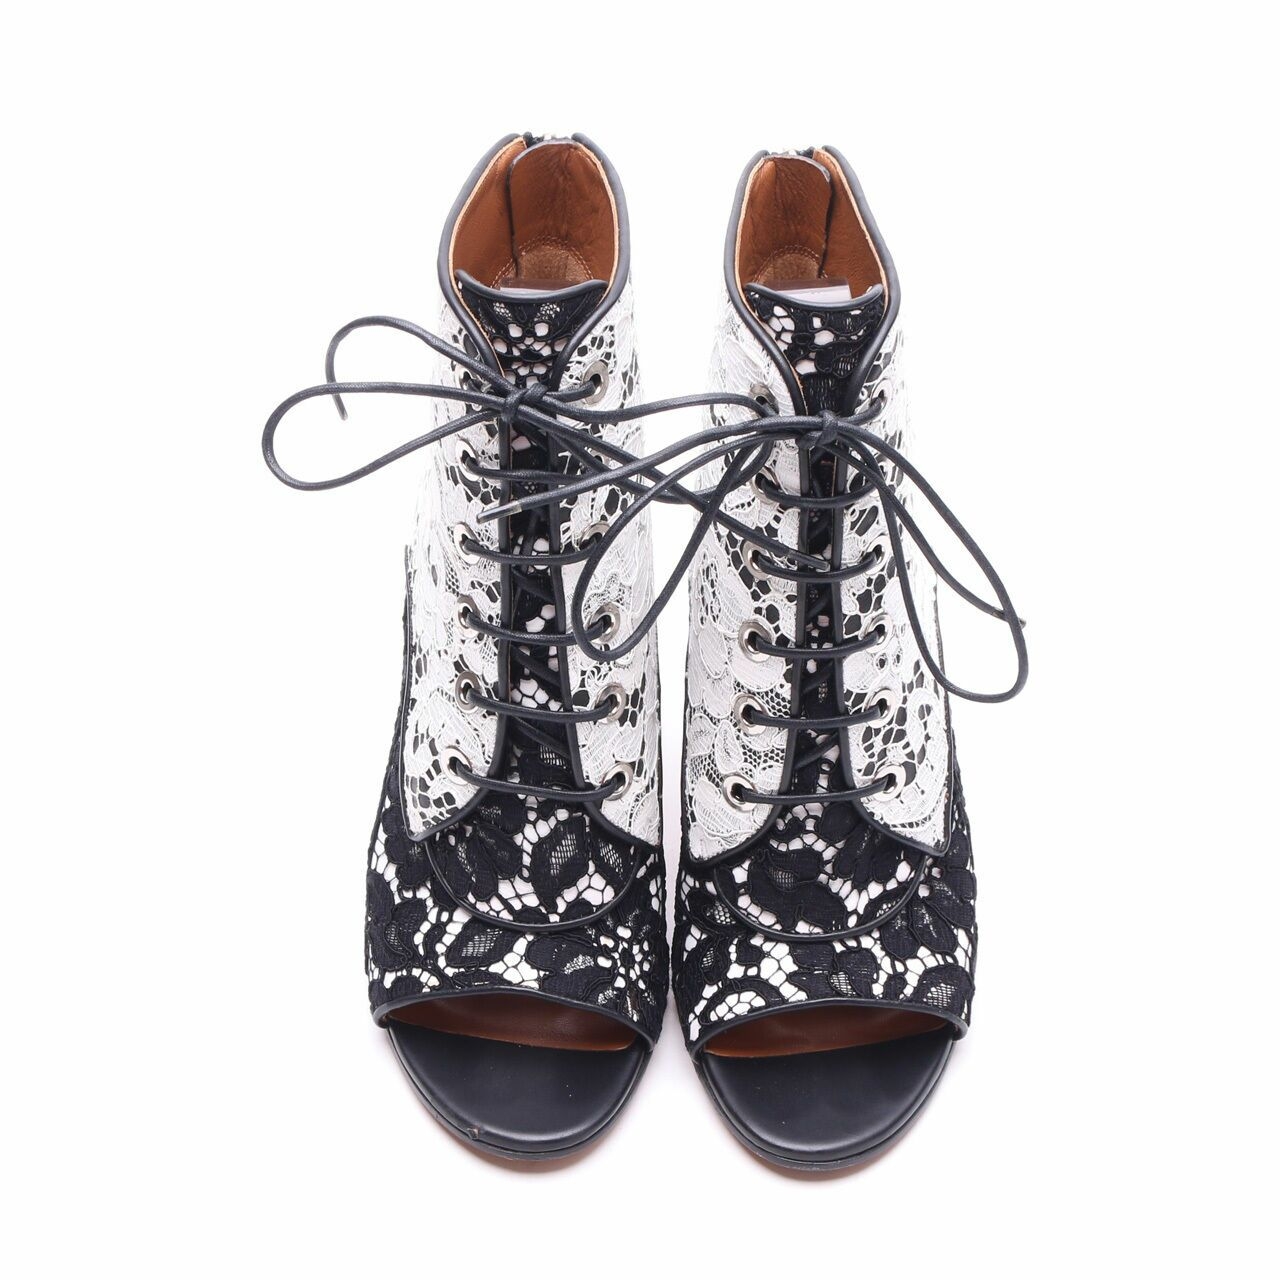 Givenchy Black And White Lace & Leather Open Toe Boots